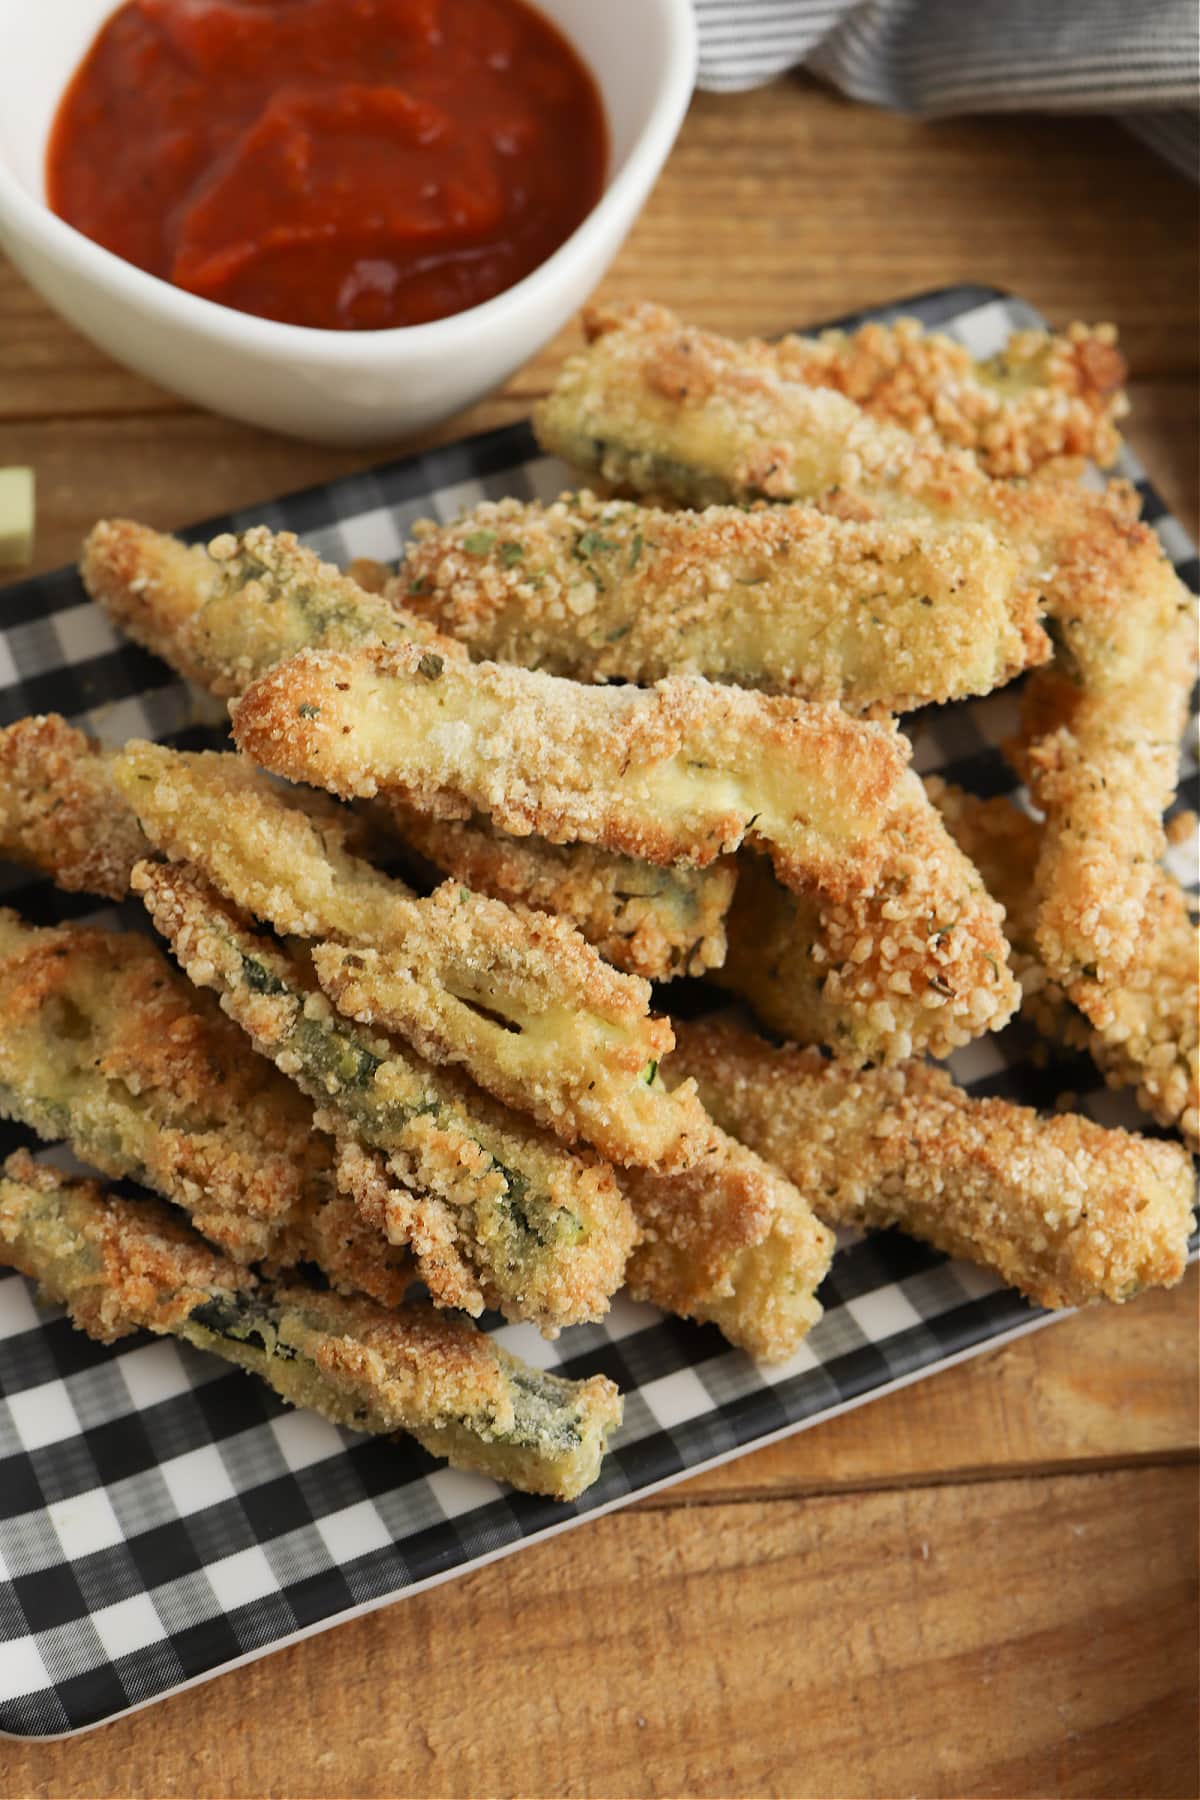 Crispy baked zucchini fries on checkered plate